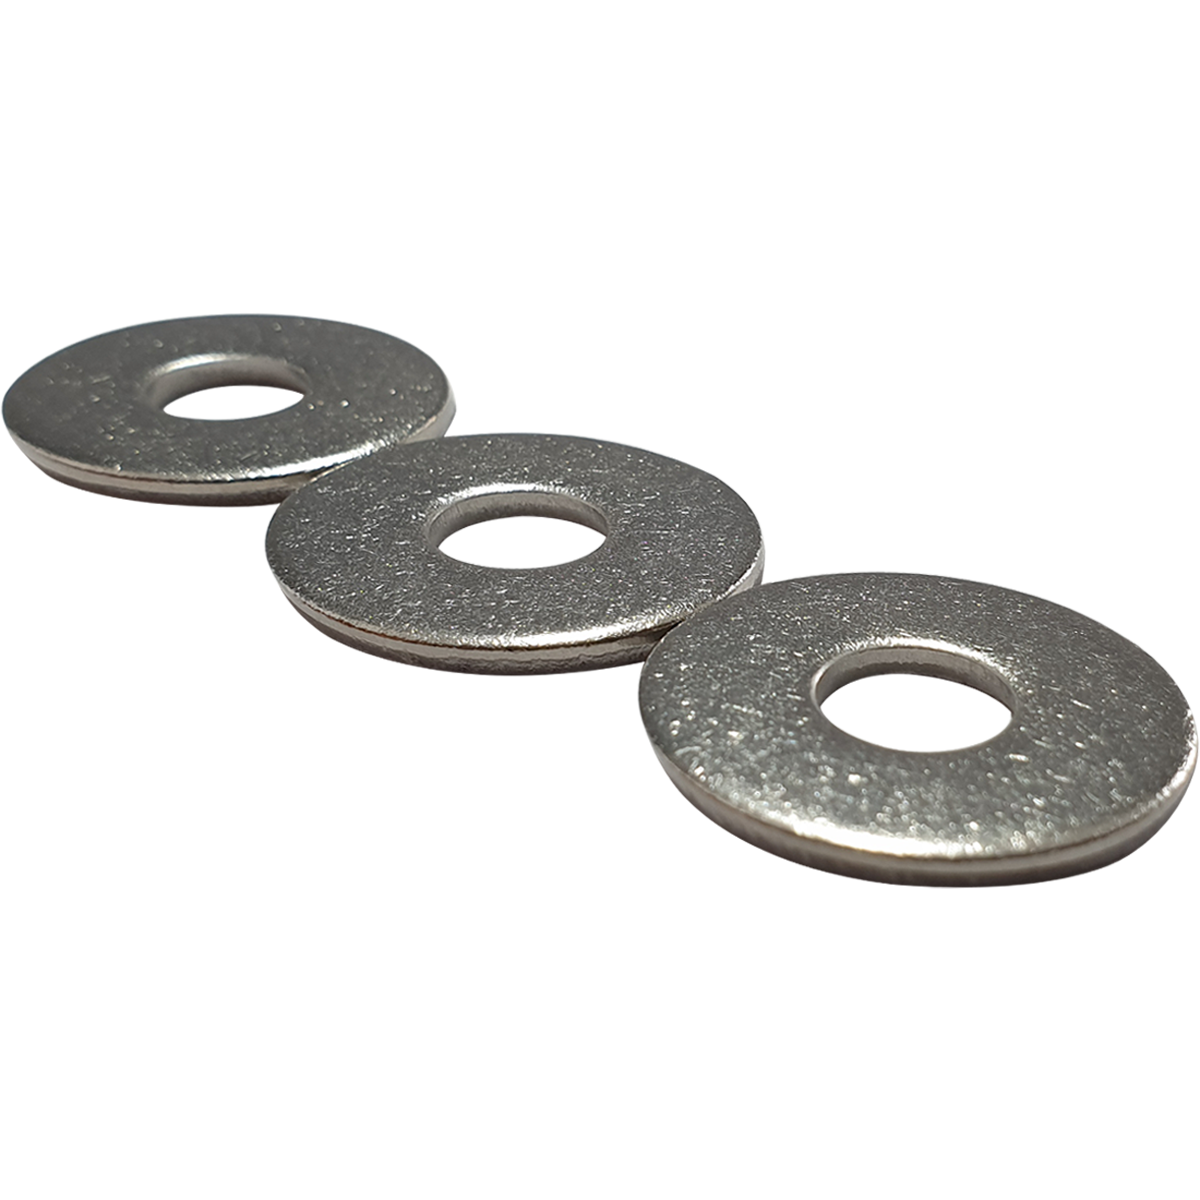 Metric, A2 stainless steel, ‘Form G’ flat washers are available in various diameters at competitive prices.